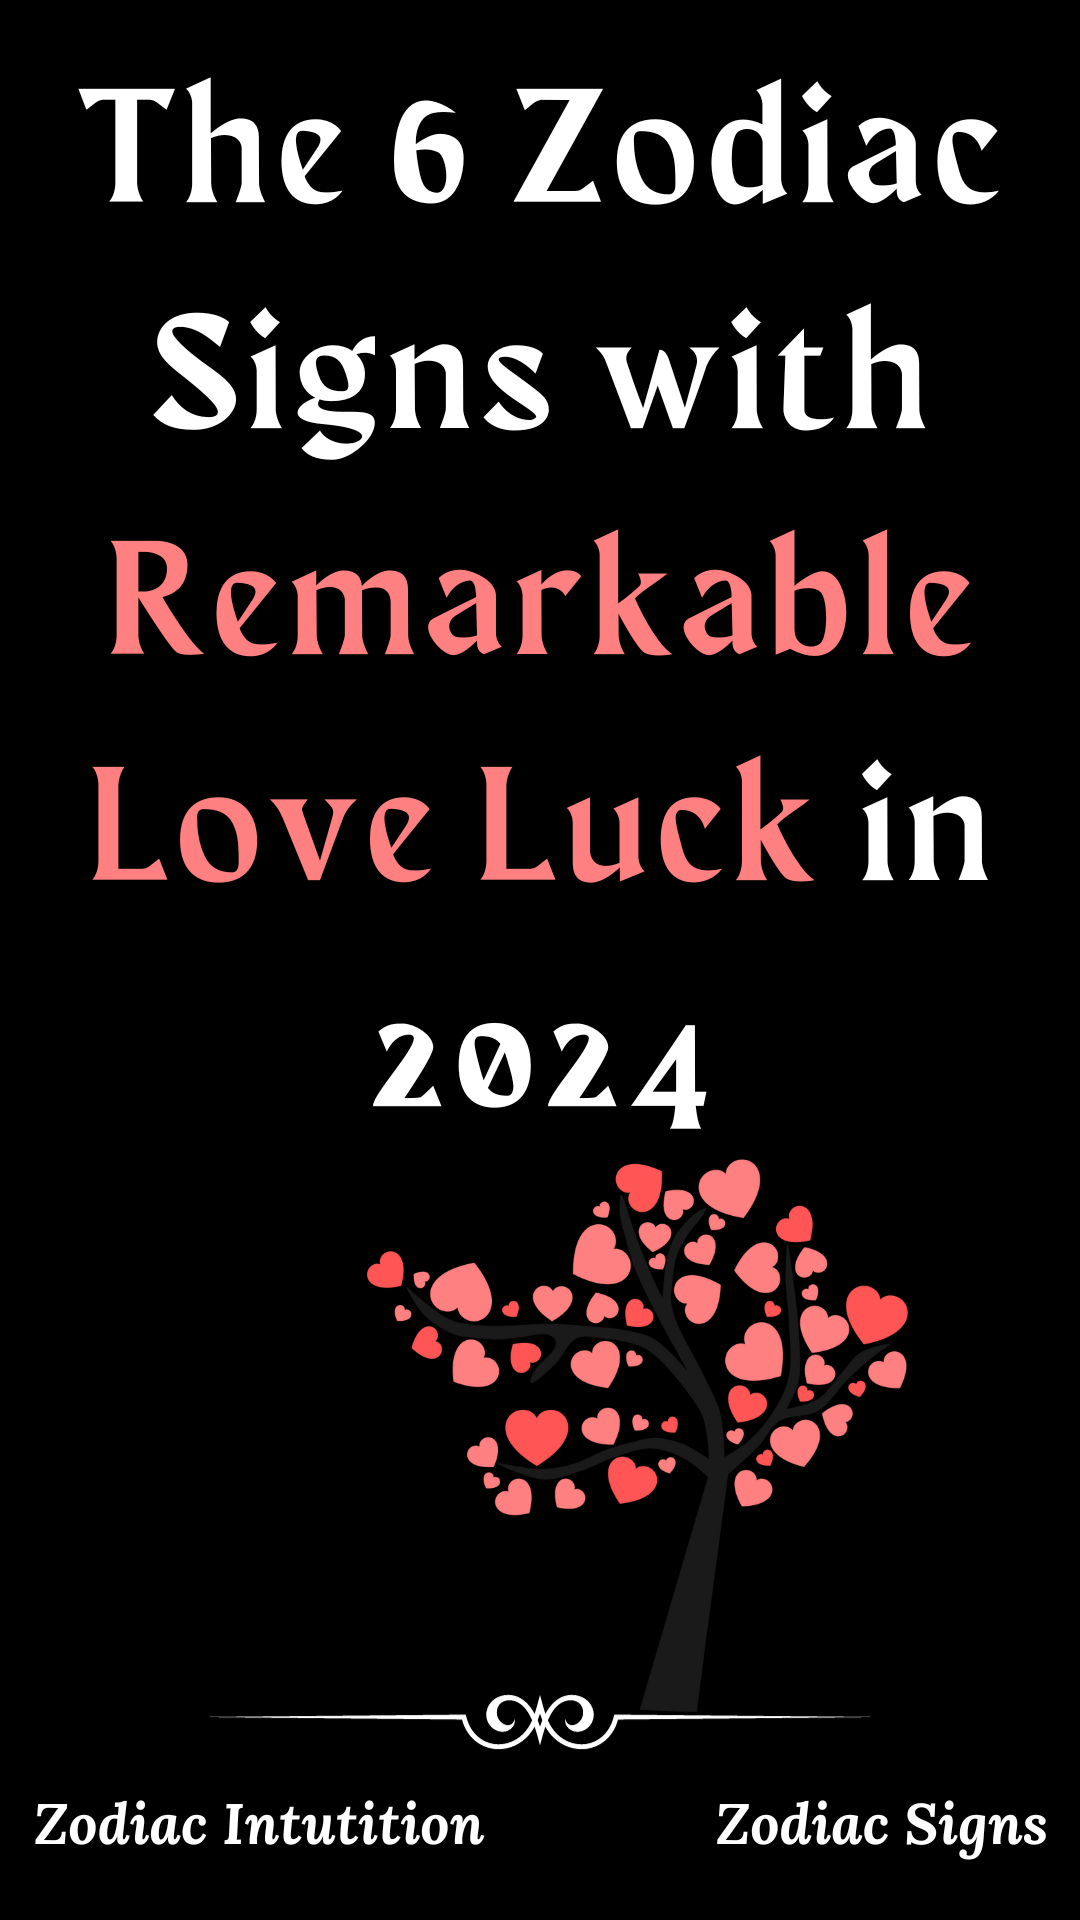 The 6 Zodiac Signs with Remarkable Love Luck in 2024